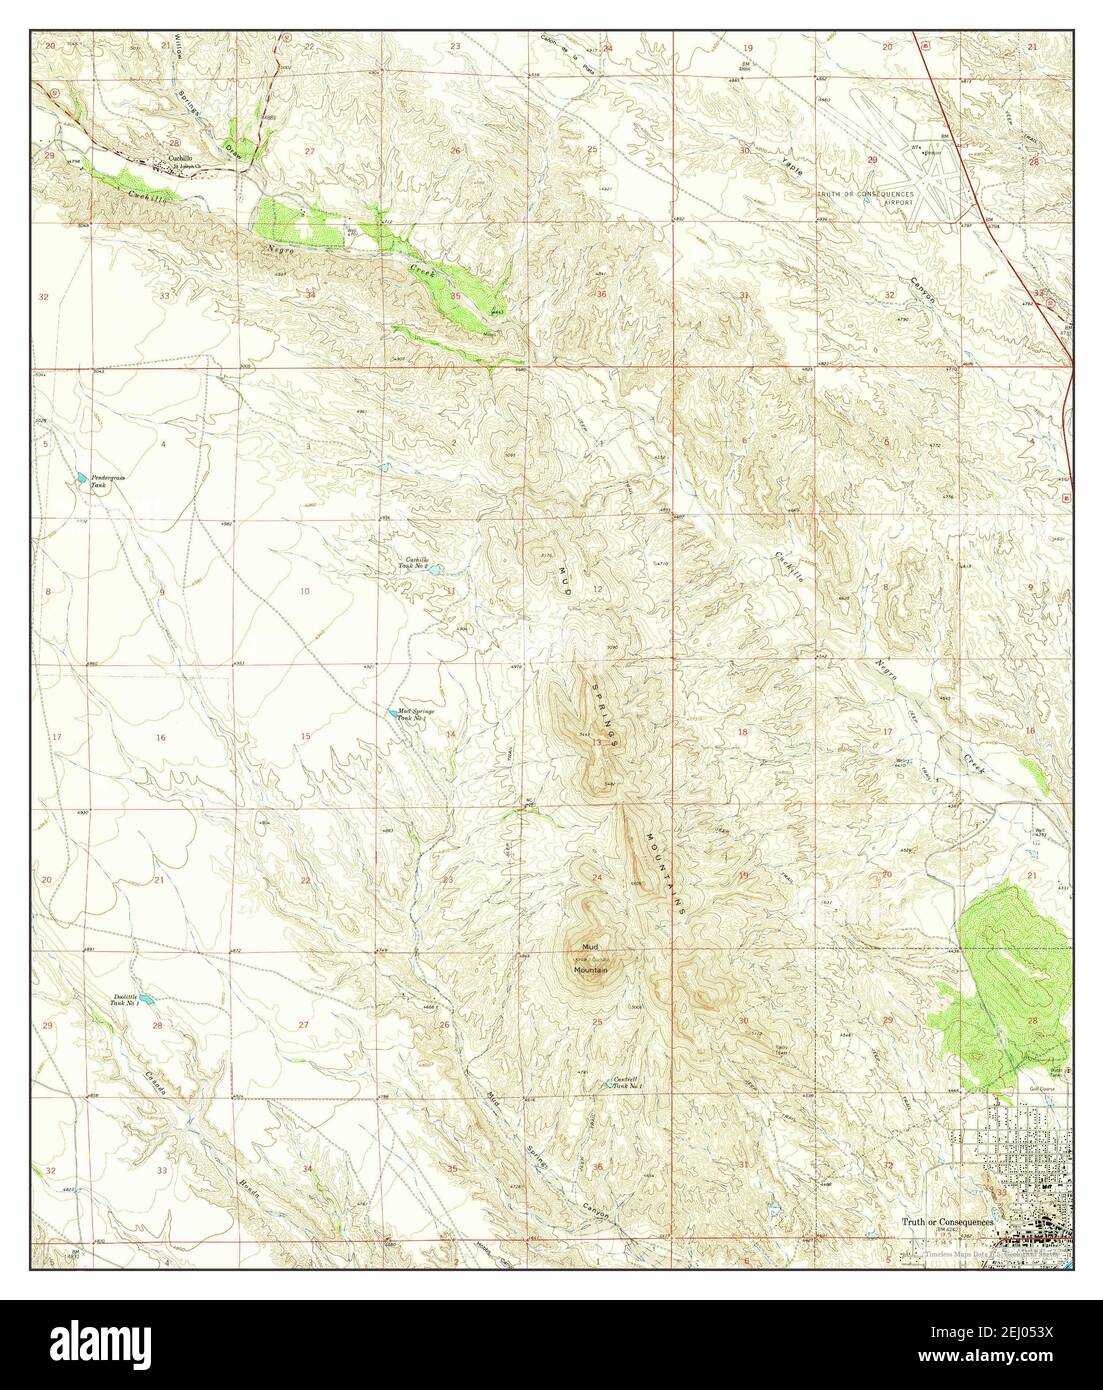 Cuchillo, New Mexico, map 1961, 1:24000, United States of America by Timeless Maps, data U.S. Geological Survey Stock Photo